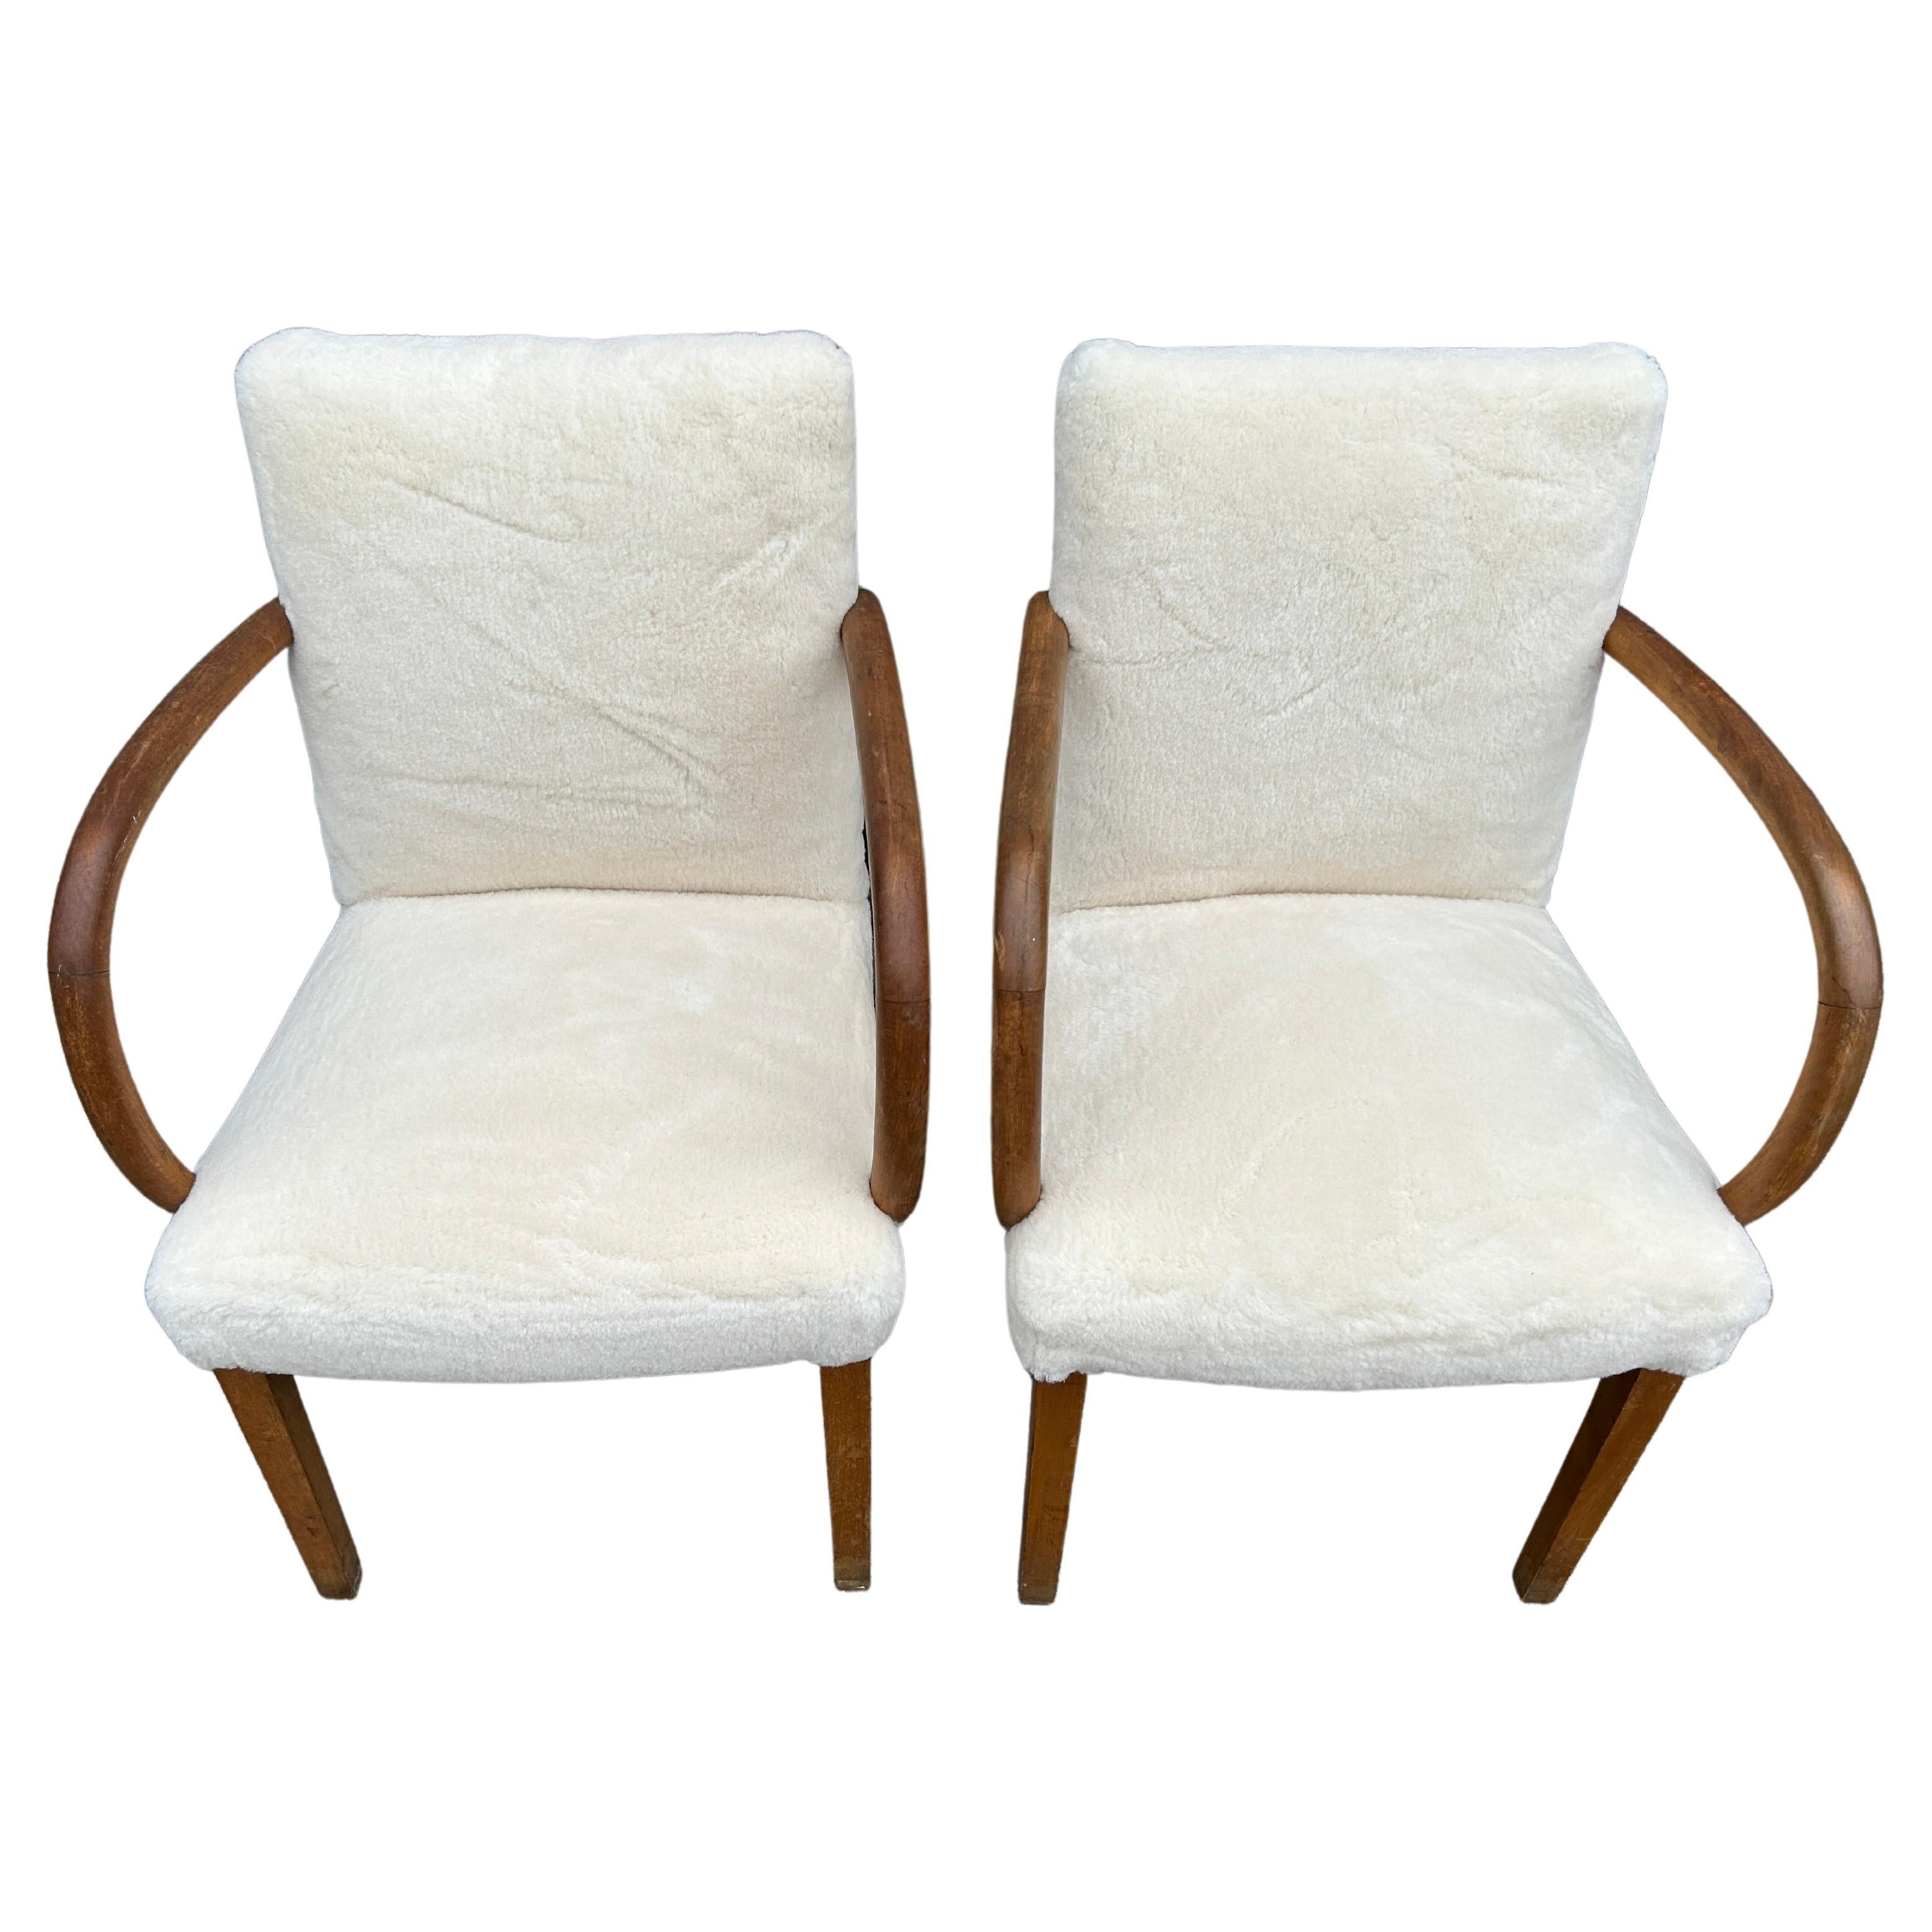 Swedish Mid Century Scandinavian Modern Pair of Curved Armchairs with White Sherpa For Sale